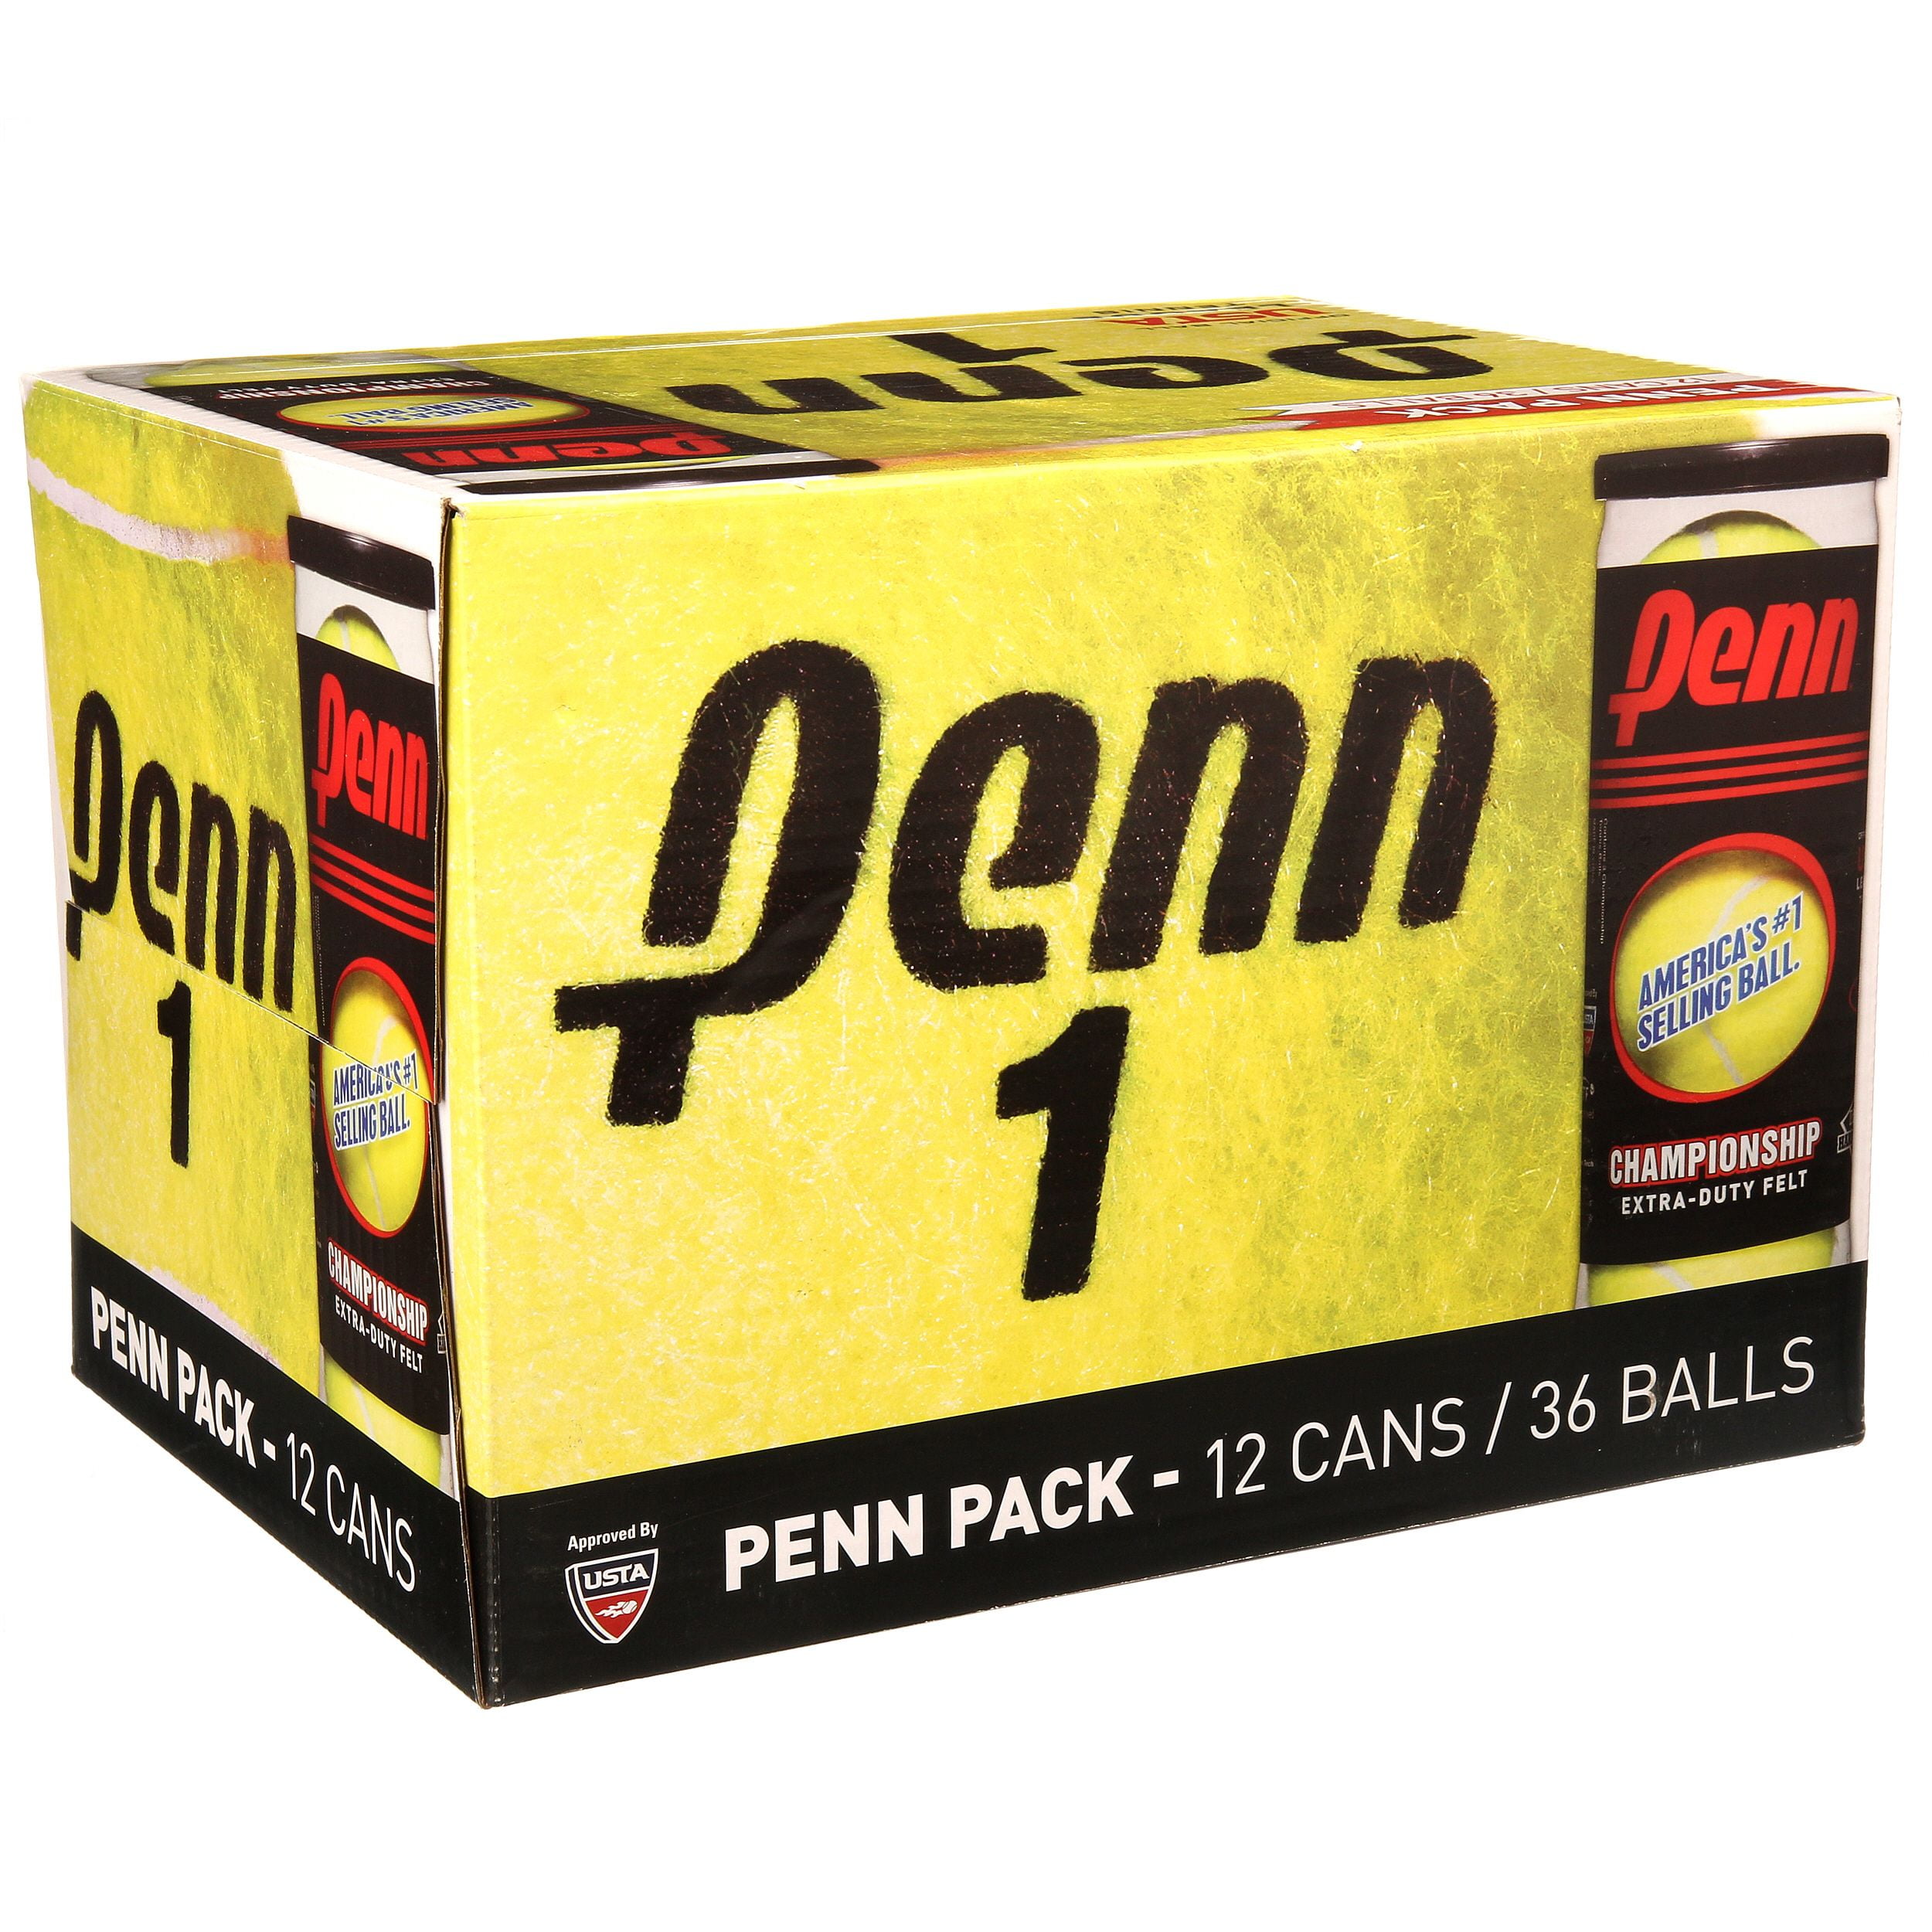 Penn Championship Extra Duty Tennis Balls for sale online Pack of 12 